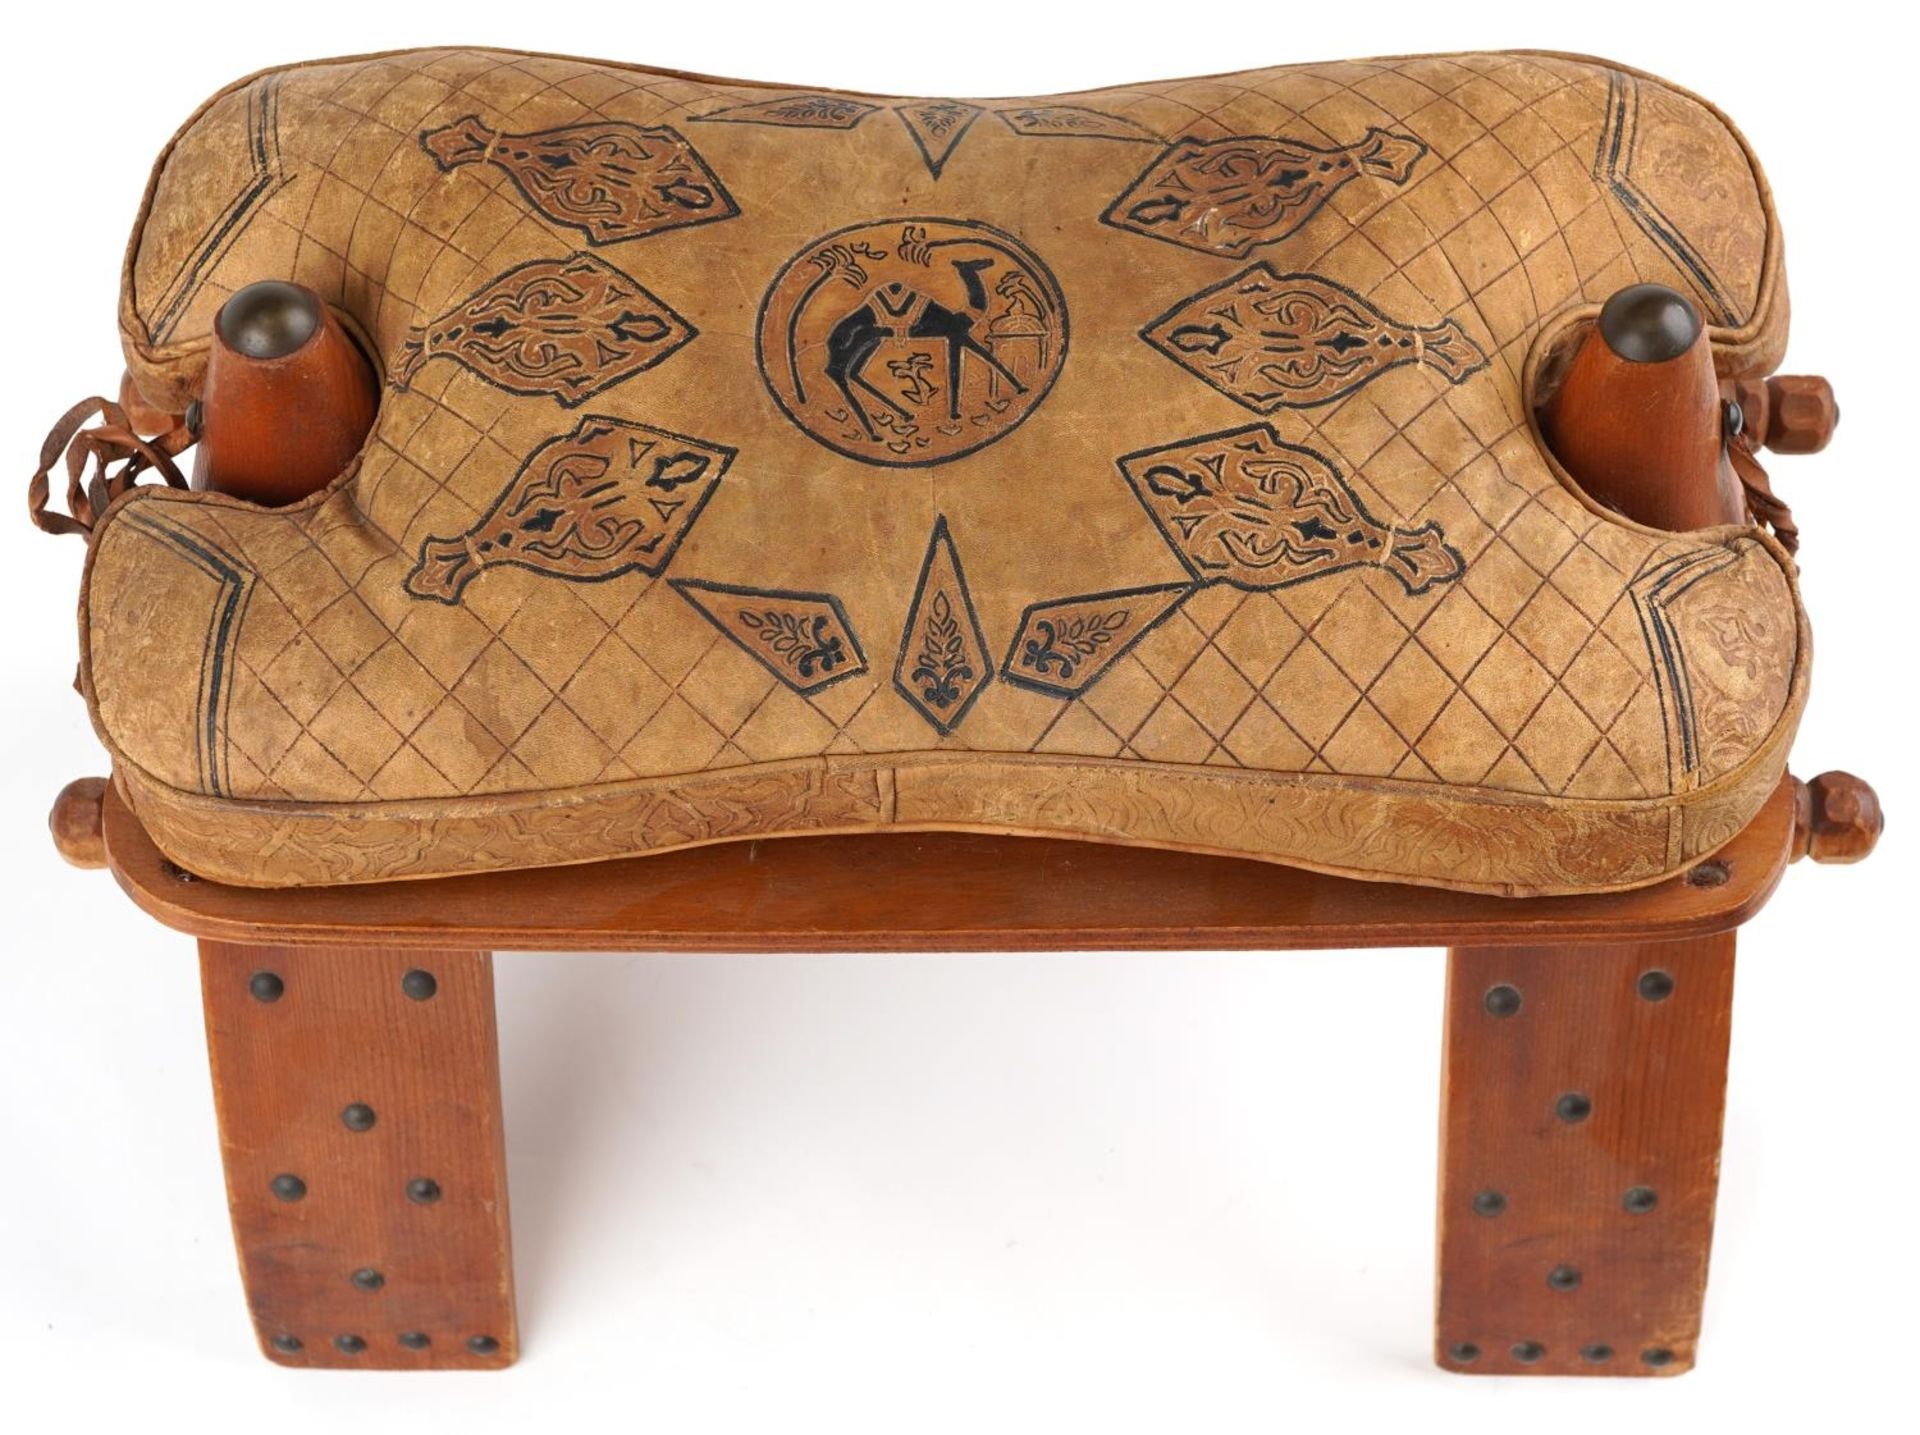 Vintage hardwood camel stool with leather upholstered cushion tooled with foliate motifs and a - Image 2 of 5